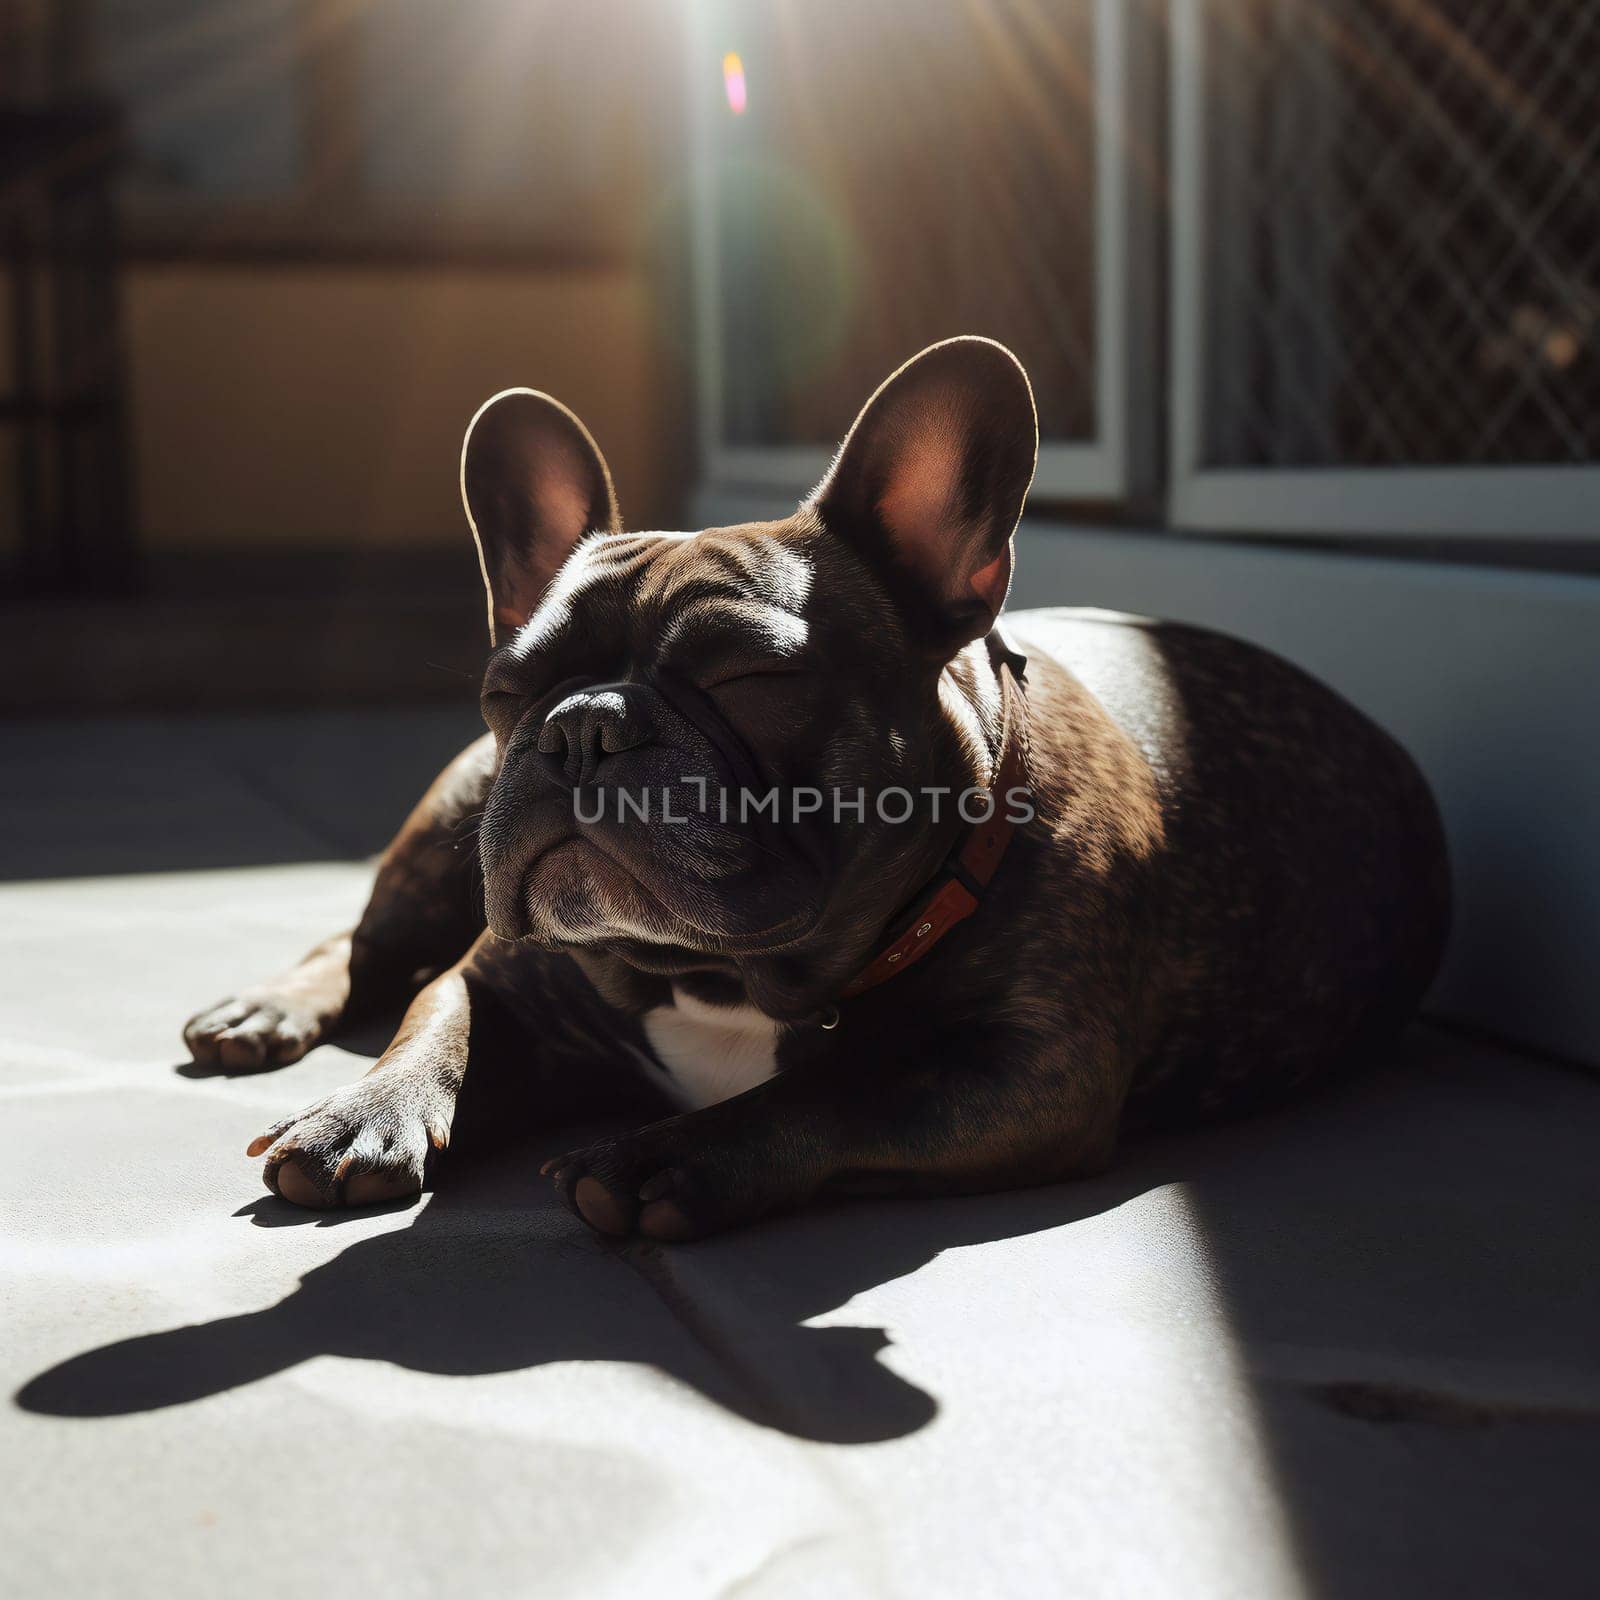 A Very Cute French Bulldog Sleeping outside. frenchie sleeps in the sun.